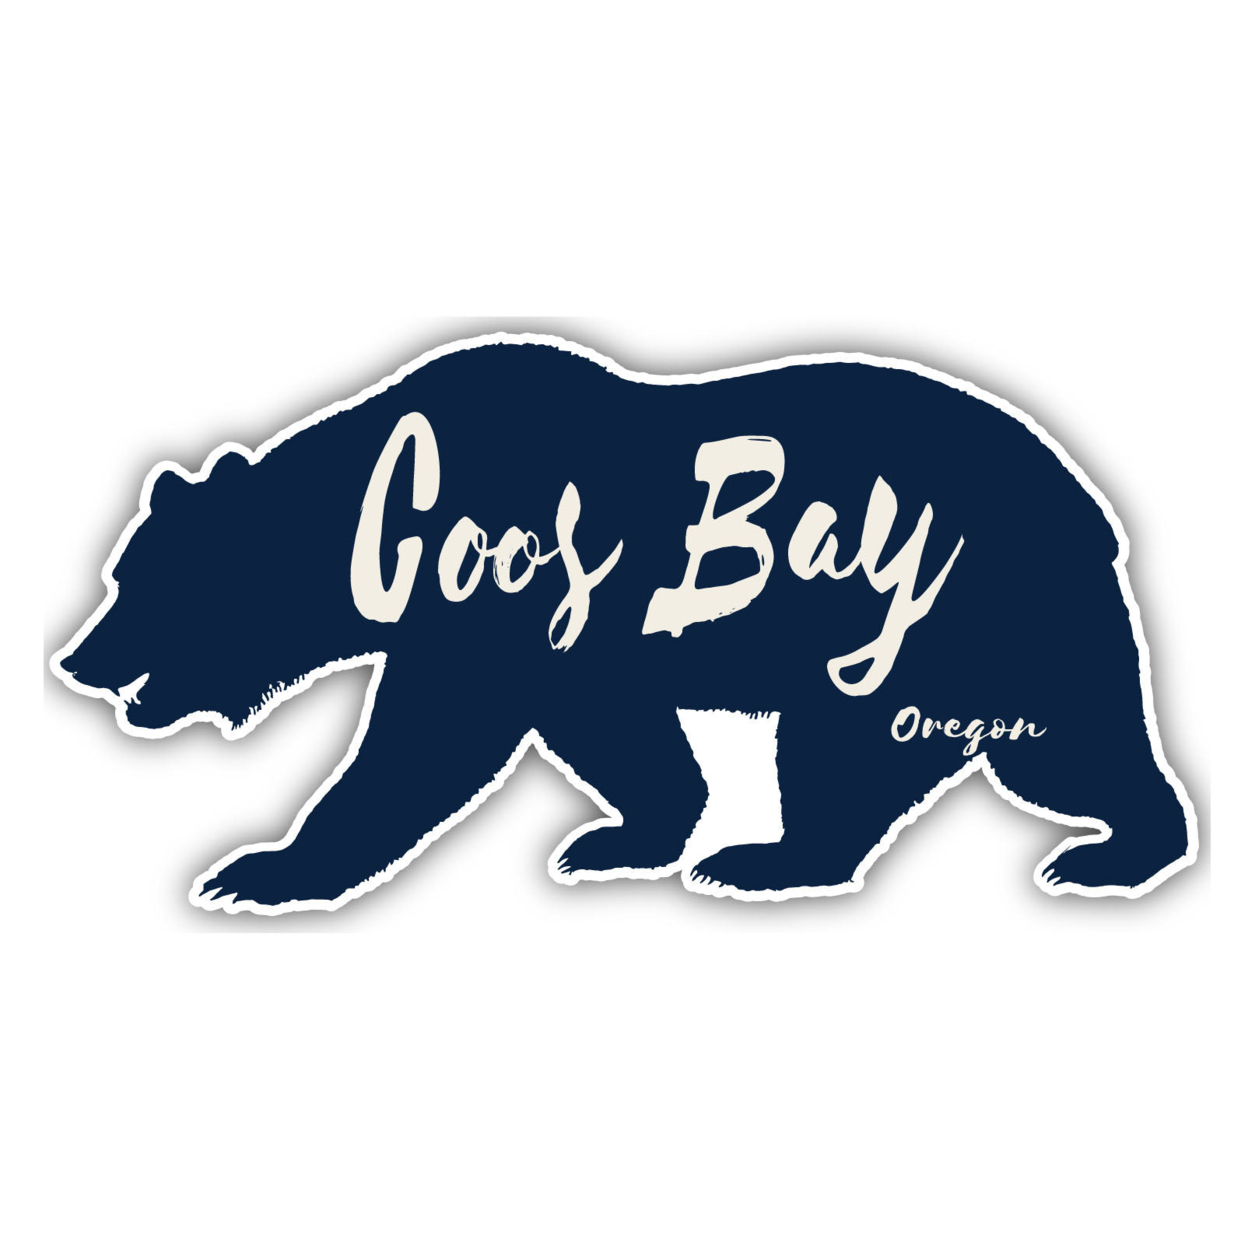 Coos Bay Oregon Souvenir Decorative Stickers (Choose Theme And Size) - 4-Pack, 4-Inch, Adventures Awaits